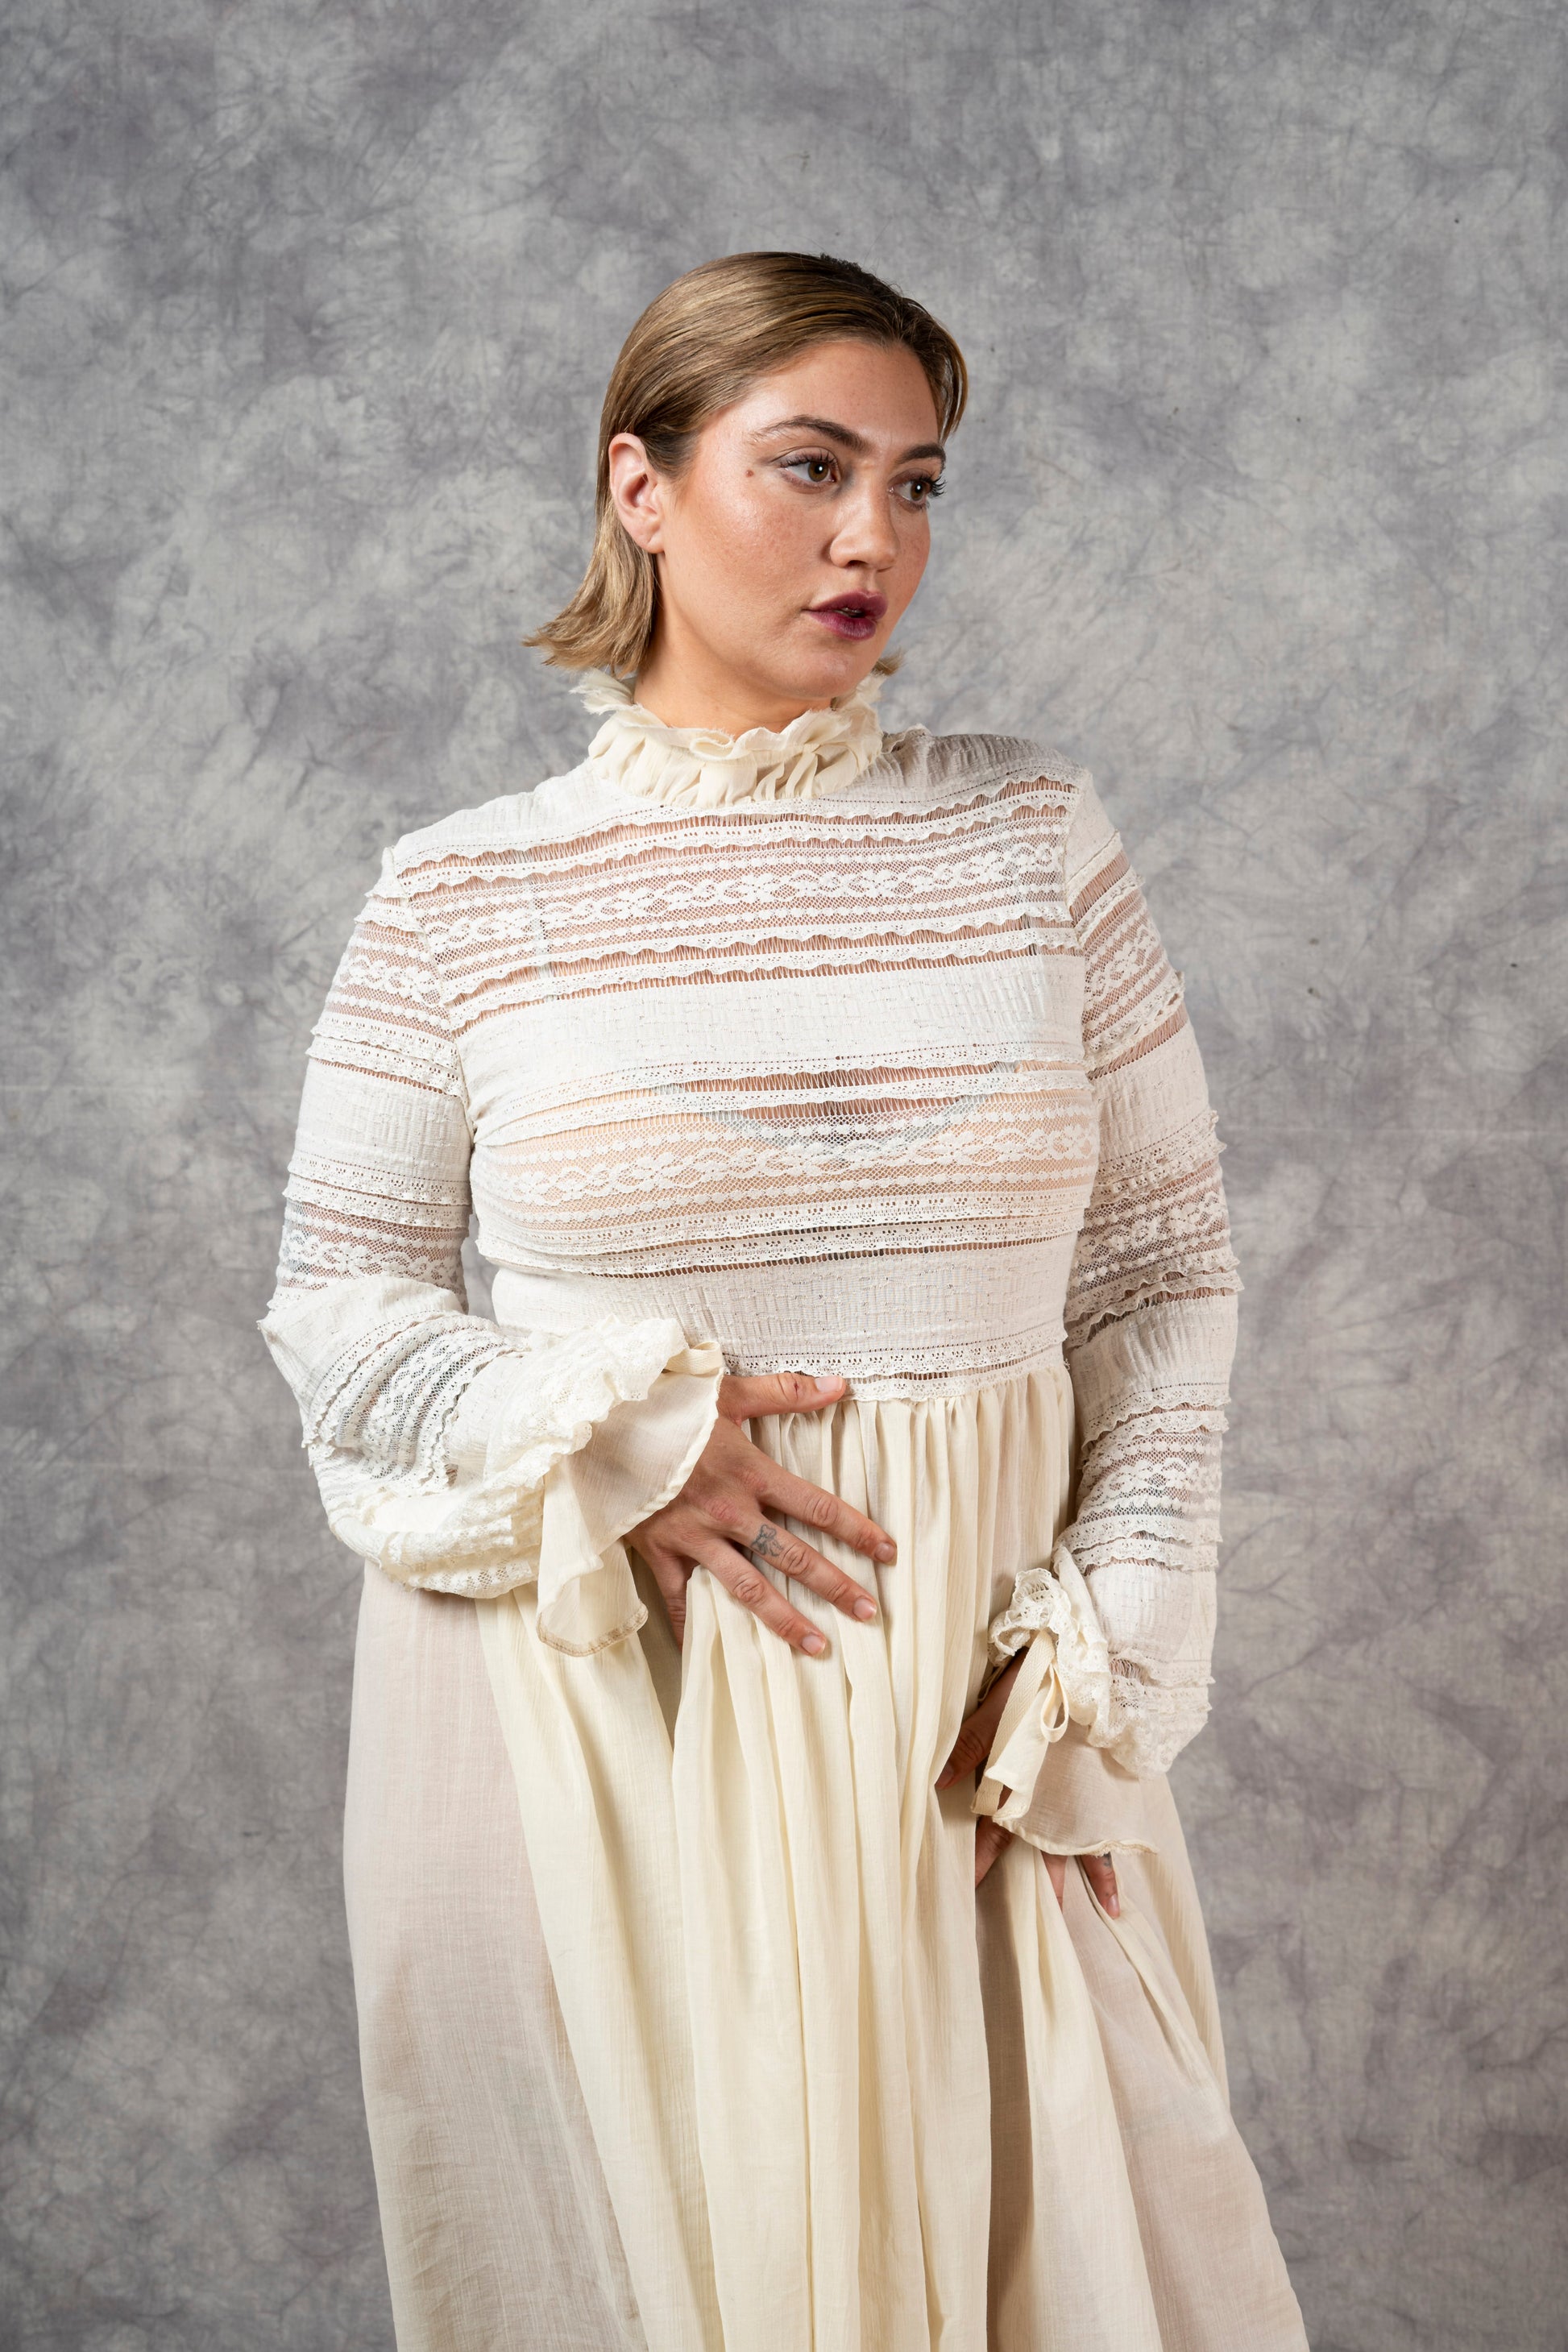 Edith Lace Top in Ivory – auratenewyork4654674.com